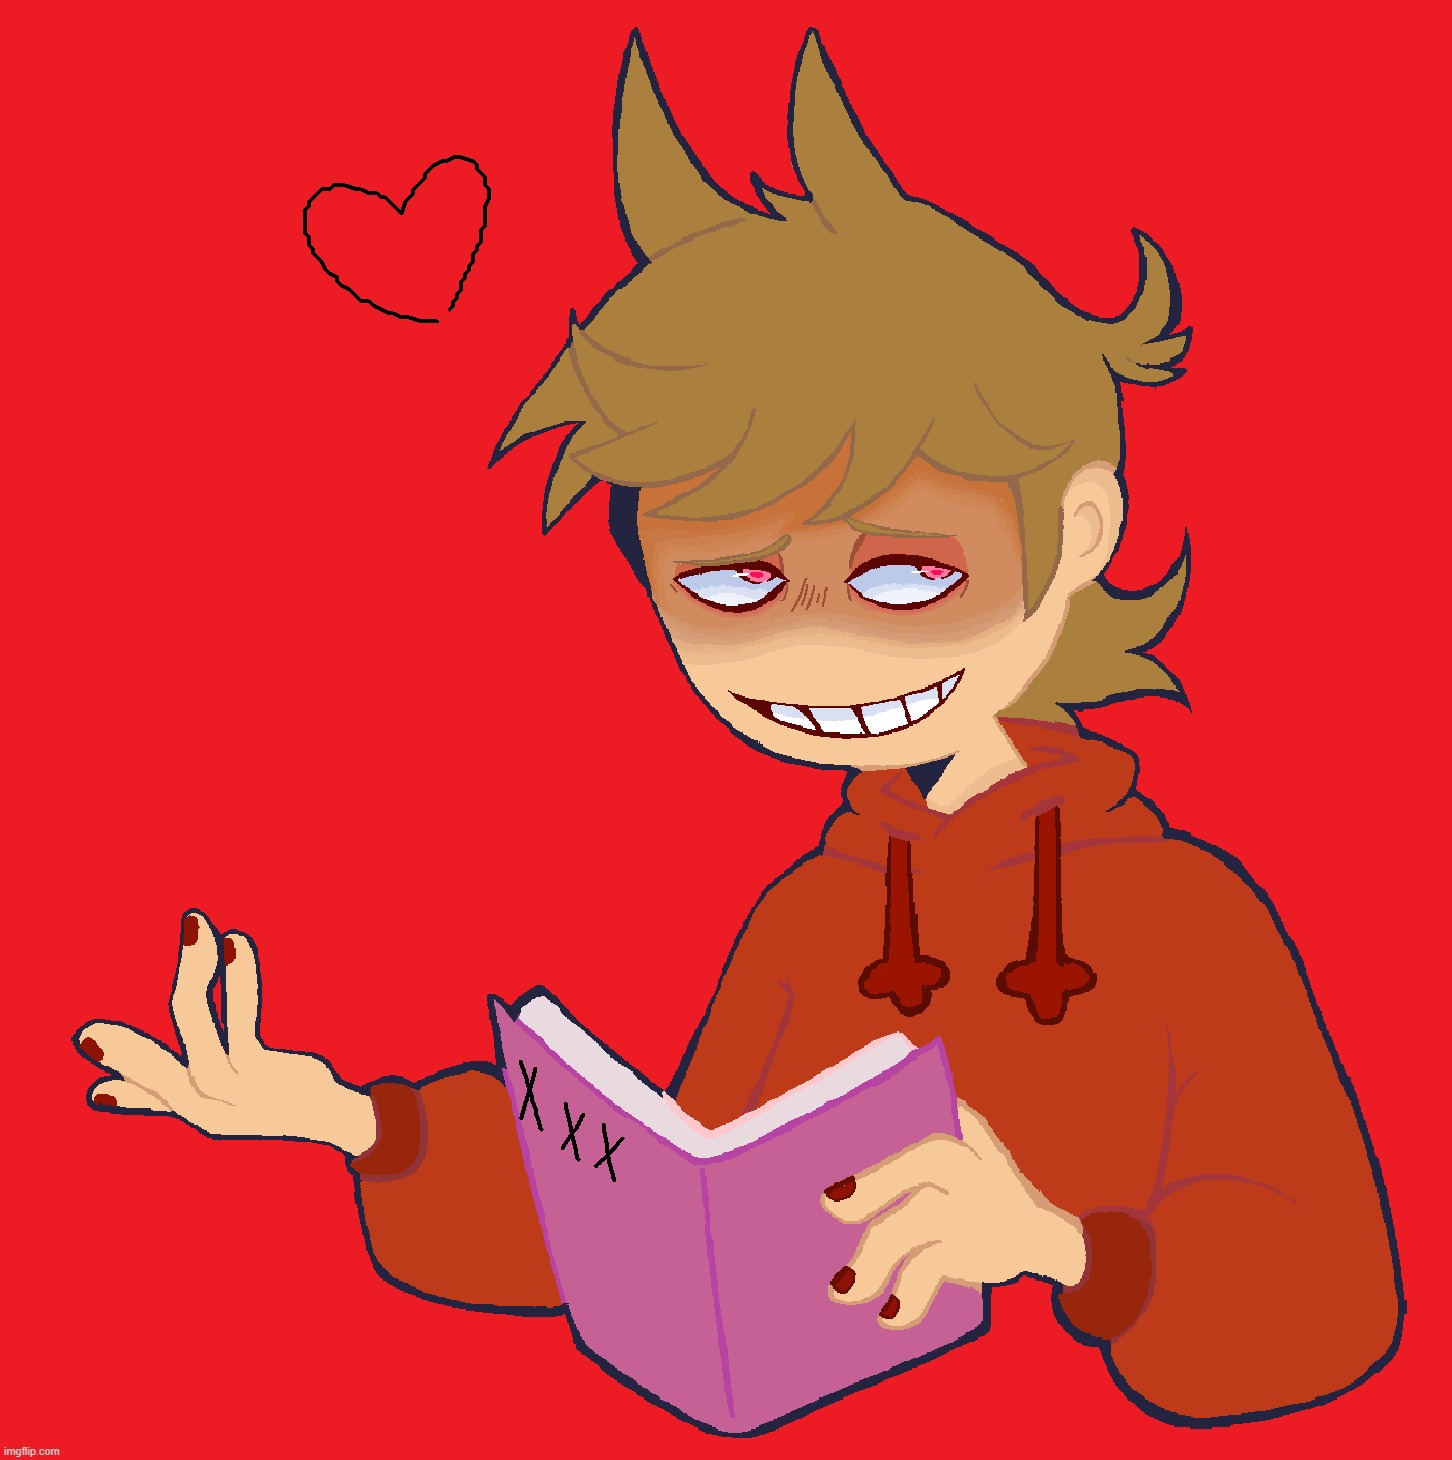 by popular demand, Tord :o) | image tagged in eddsworld | made w/ Imgflip meme maker